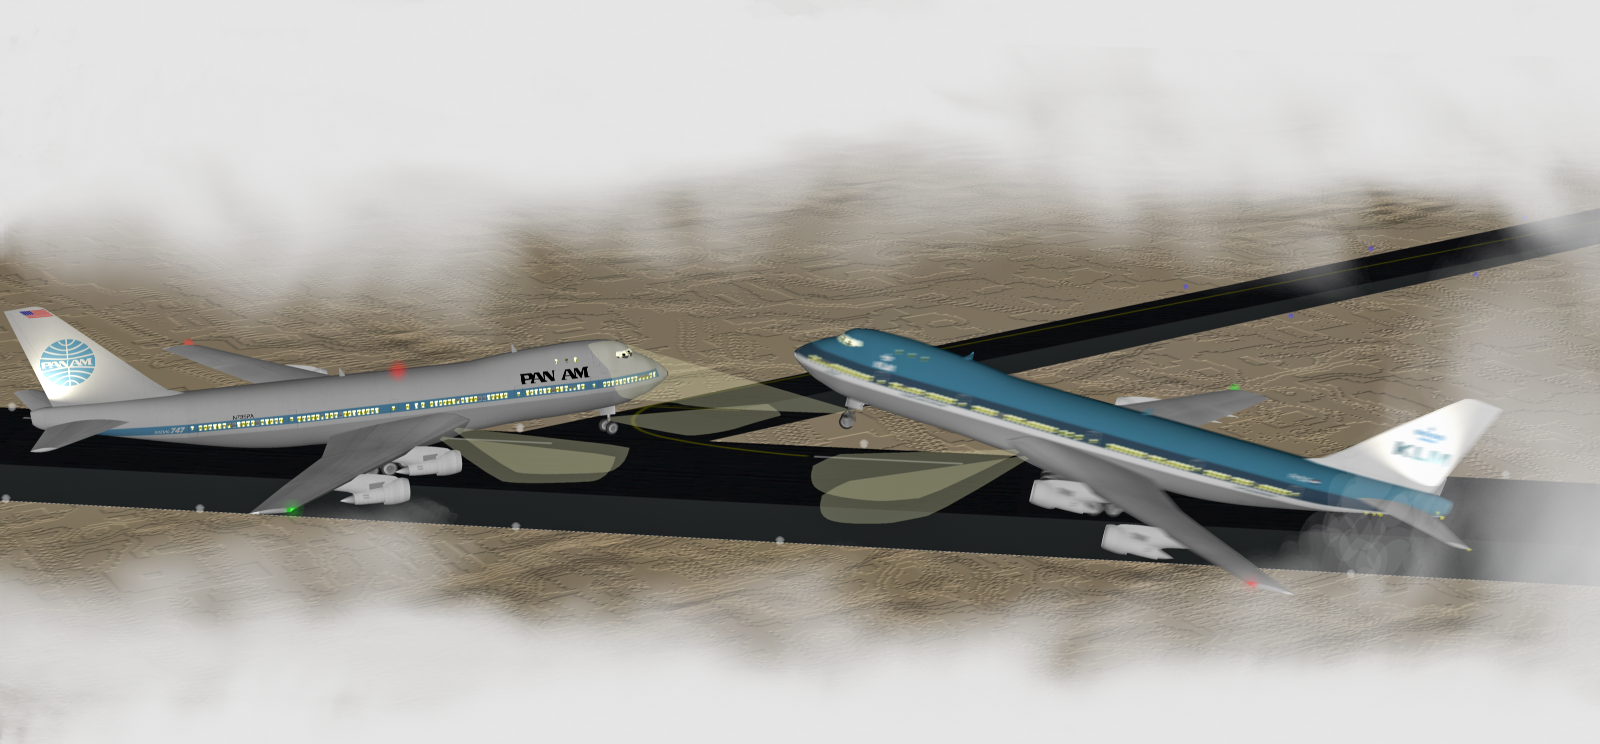 Render of the March 1977 Tenerife air disaster involving KLM and PanAm Boeing 747s.